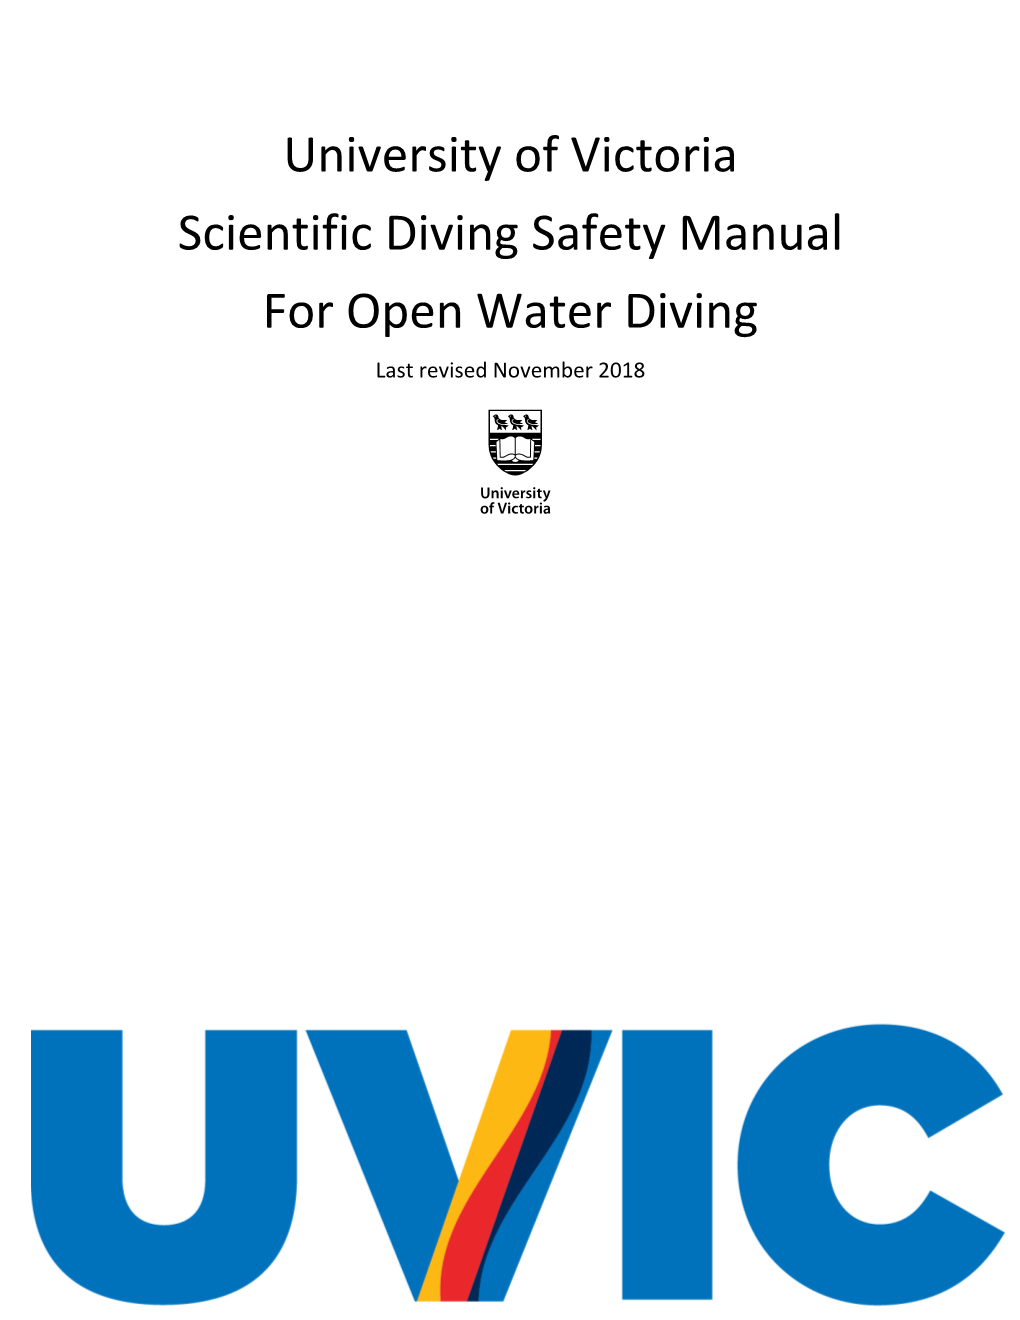 Uvic Scientific Diving Safety Manual for Open Water Diving Provides the Guidelines for All Open Water Diving Under University of Victoria Auspices